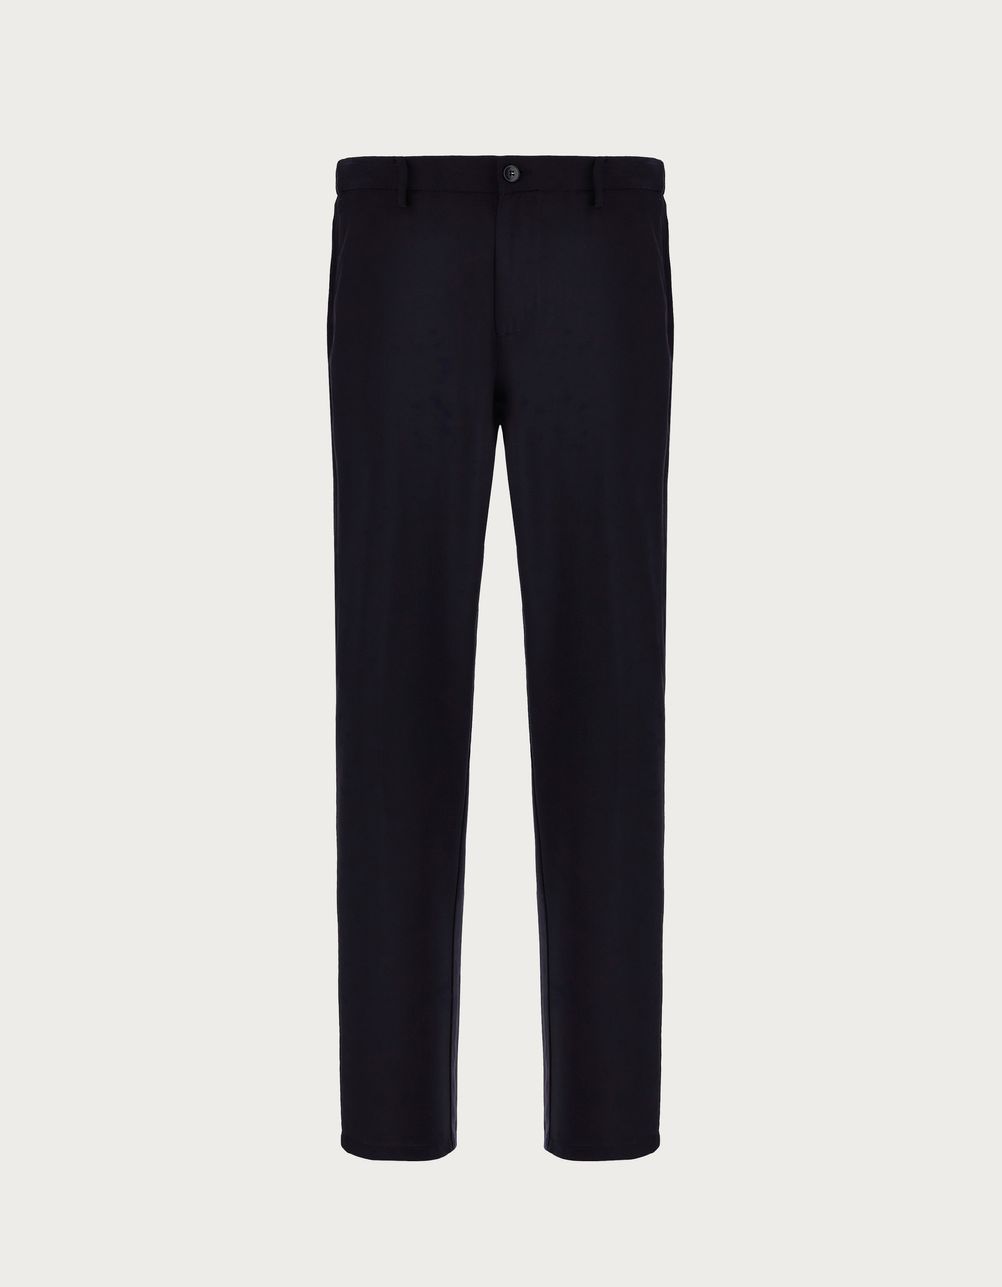 Chinos with drawstring in navy blue Impeccabile wool canvas